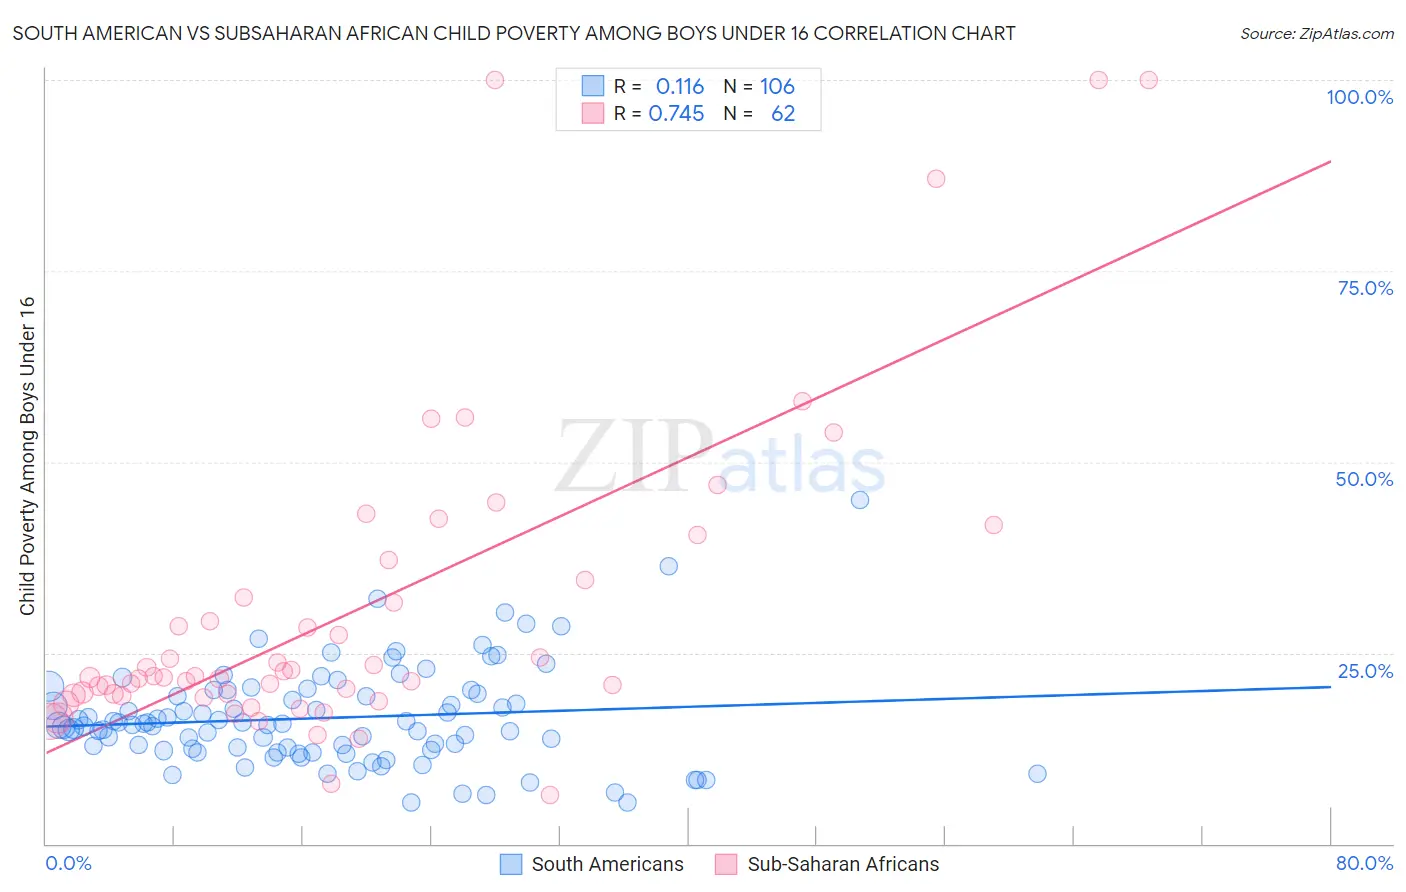 South American vs Subsaharan African Child Poverty Among Boys Under 16